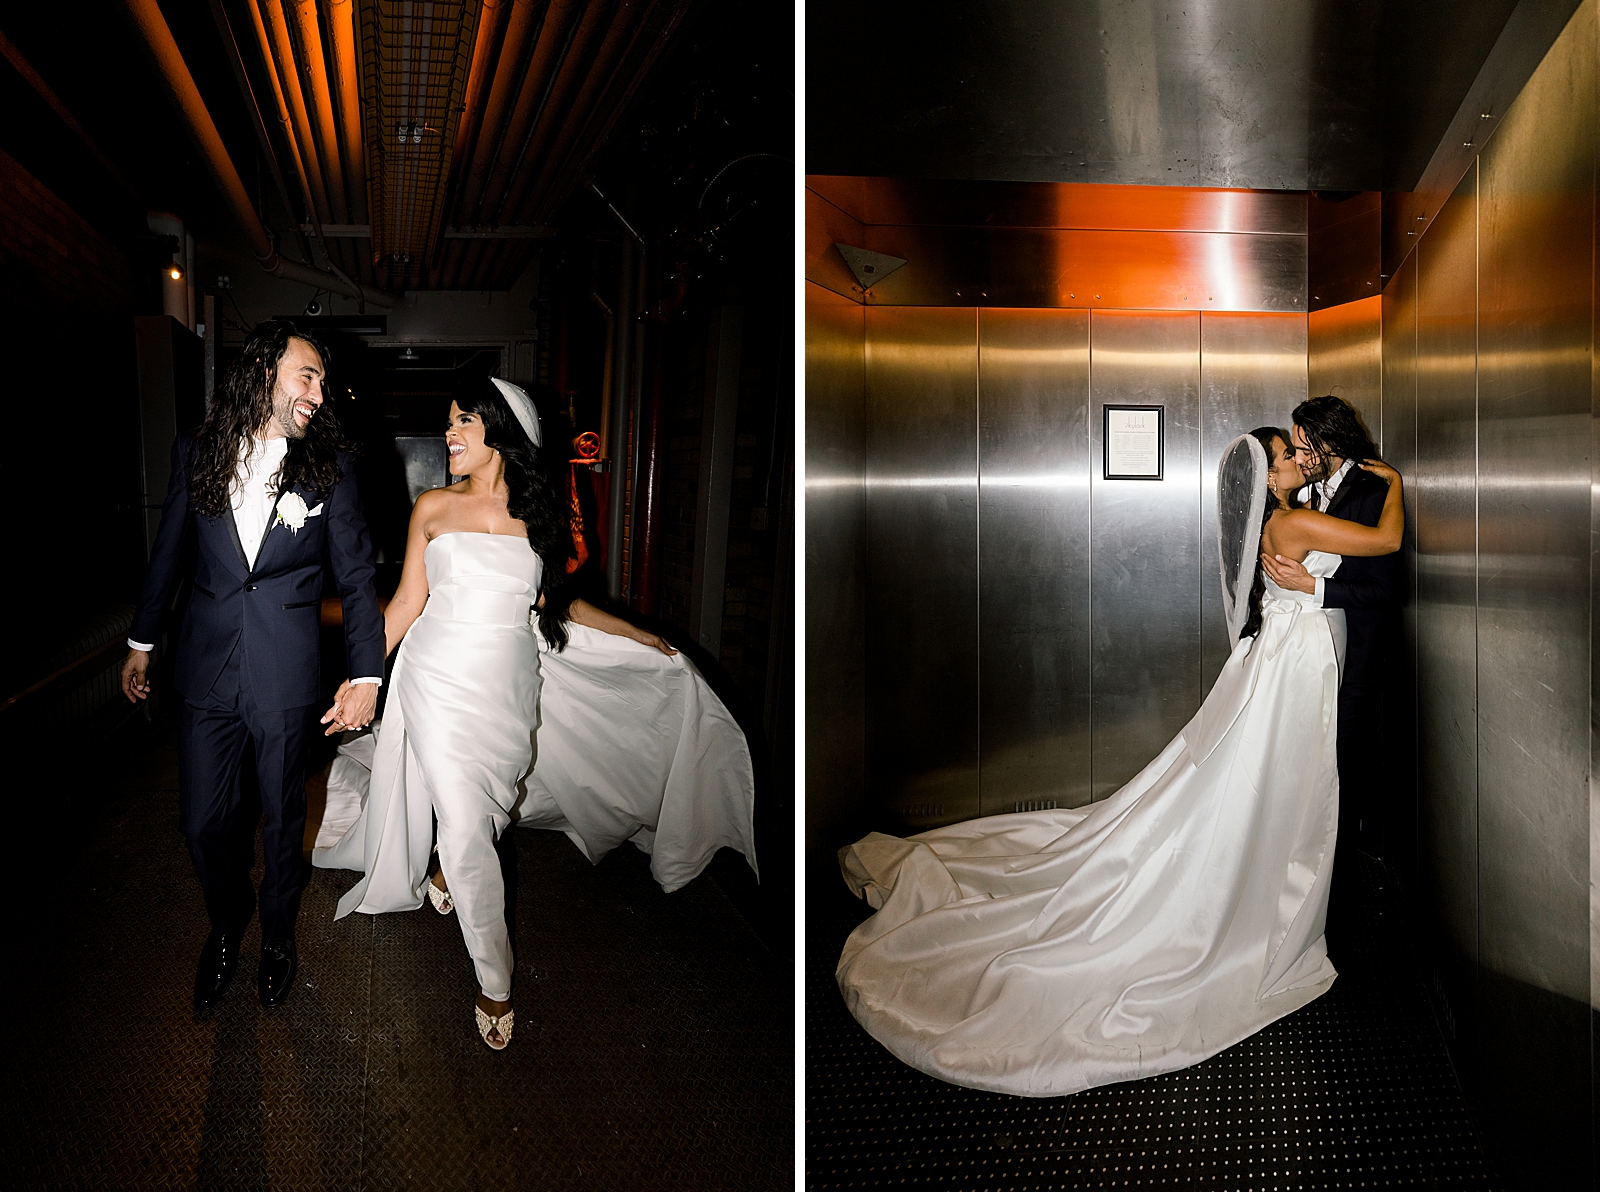 Bride and groom walking in dark hallway together and kissing in elevator